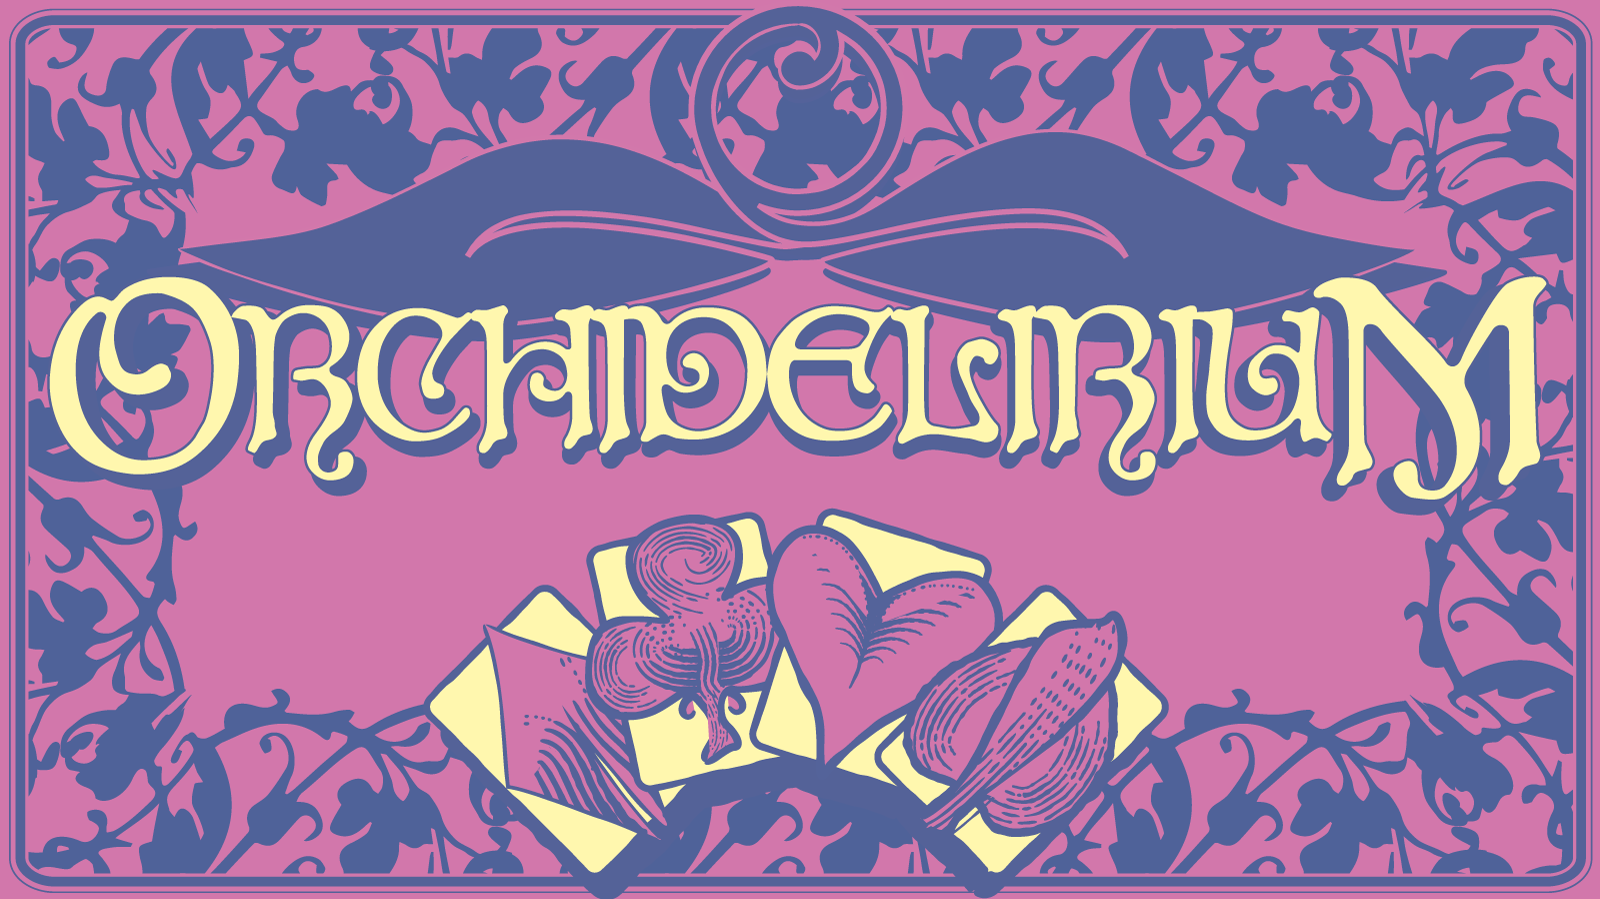 Orchidelirium, Volume One: Expedition Rules